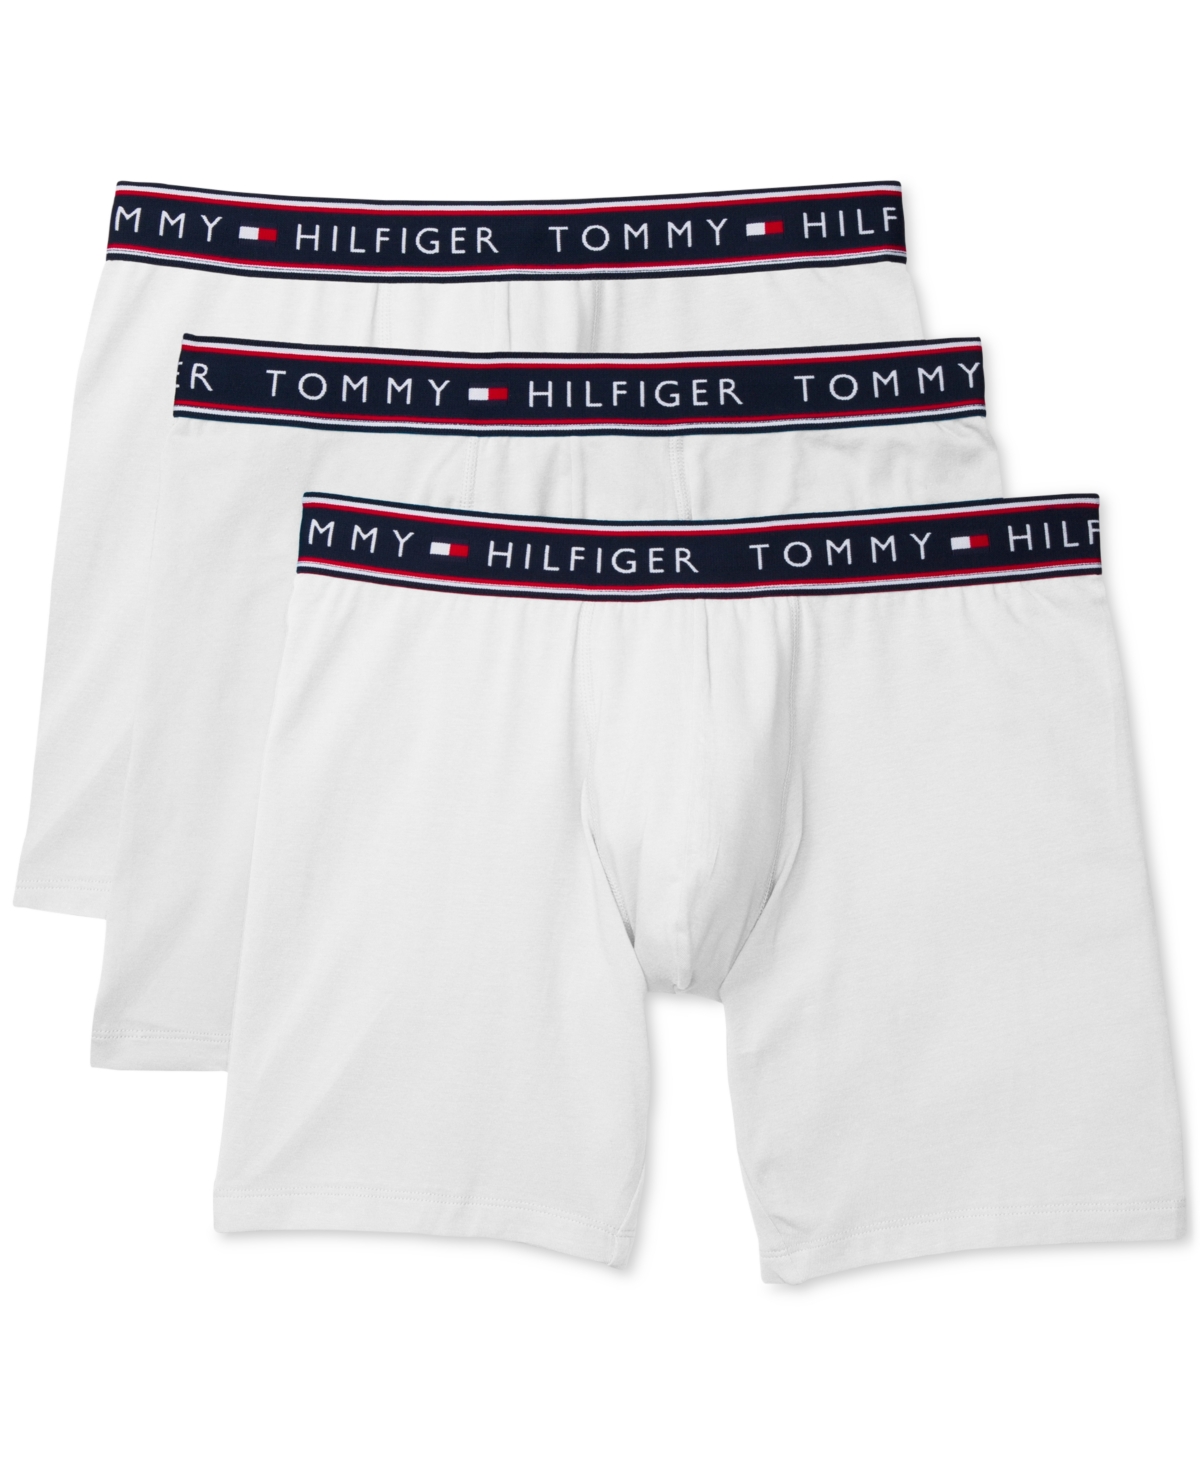 UPC 088541539340 product image for Tommy Hilfiger Men's Cotton Stretch Boxer Brief, 3 Pack | upcitemdb.com